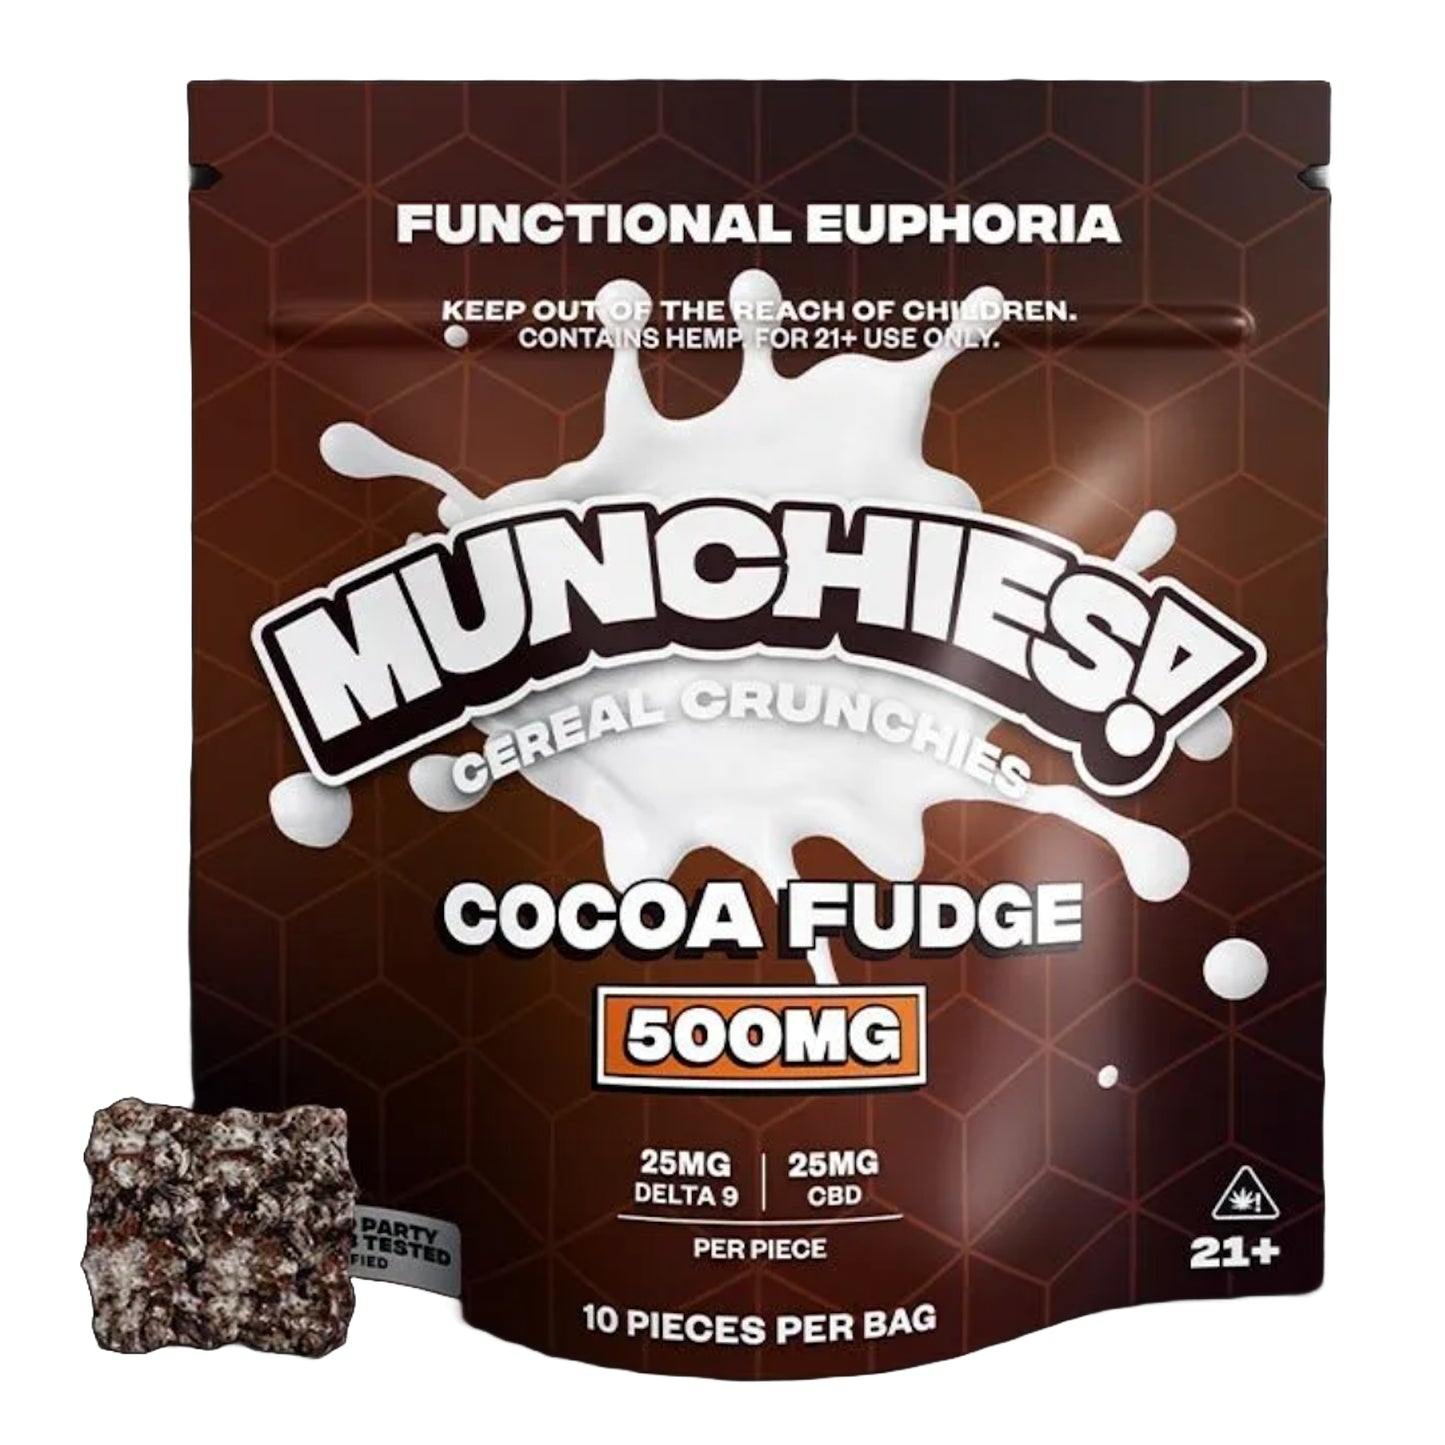 Munchies Delta 9 Cocoa Fudge Cereal Crunchies - 500mg